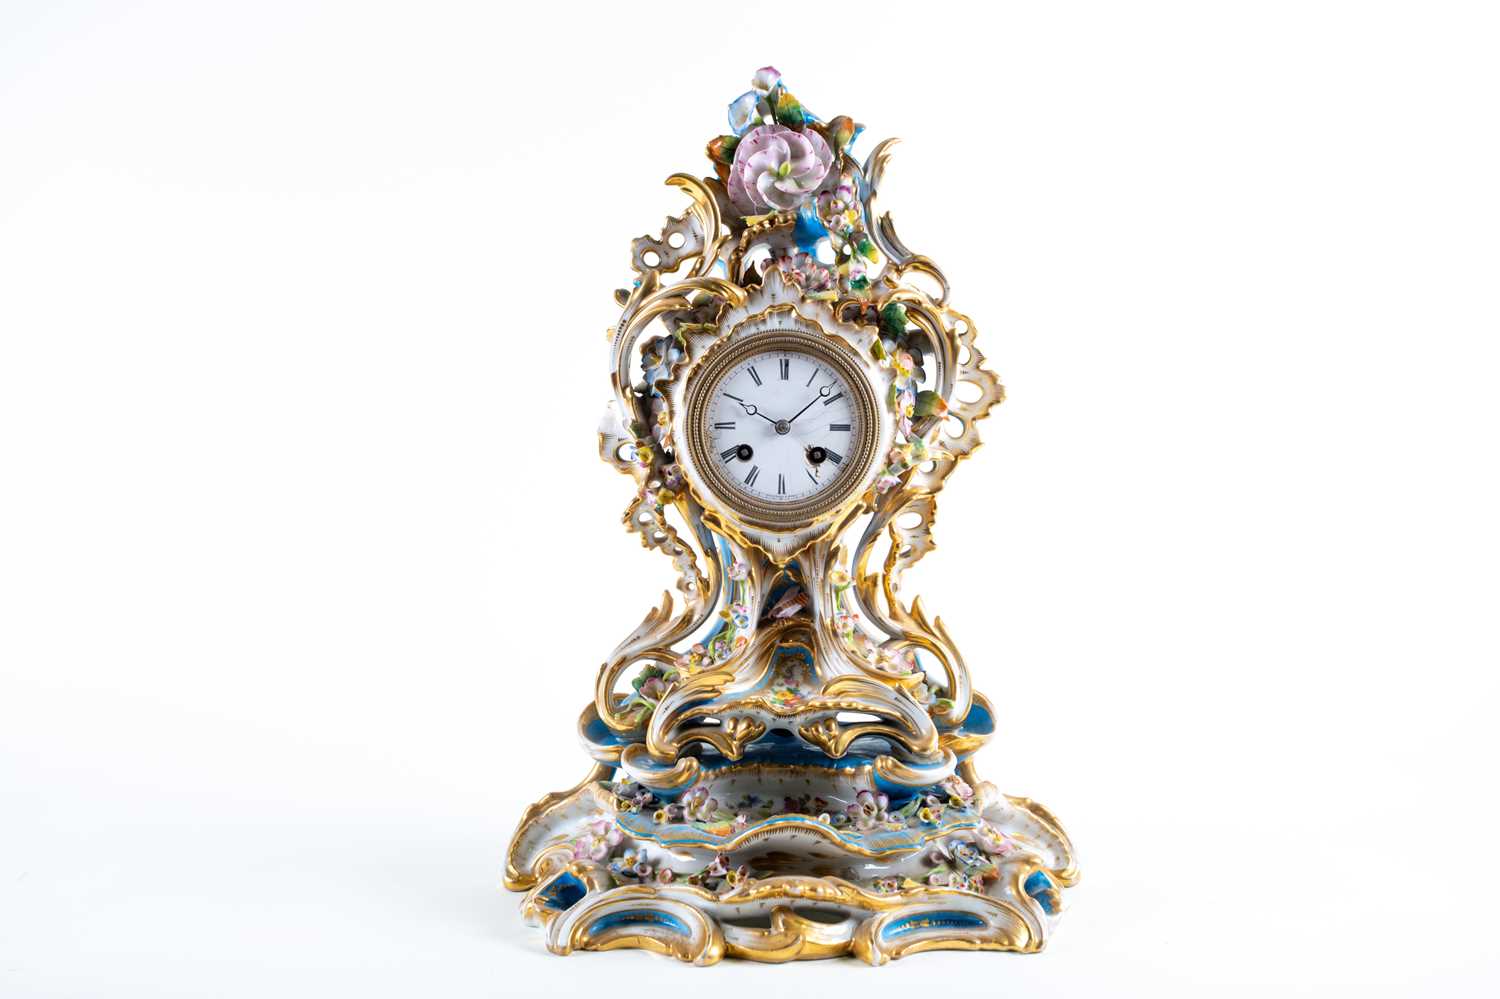 A 19th-century French porcelain chiming mantle clock on conforming stand, in the Sevres style with